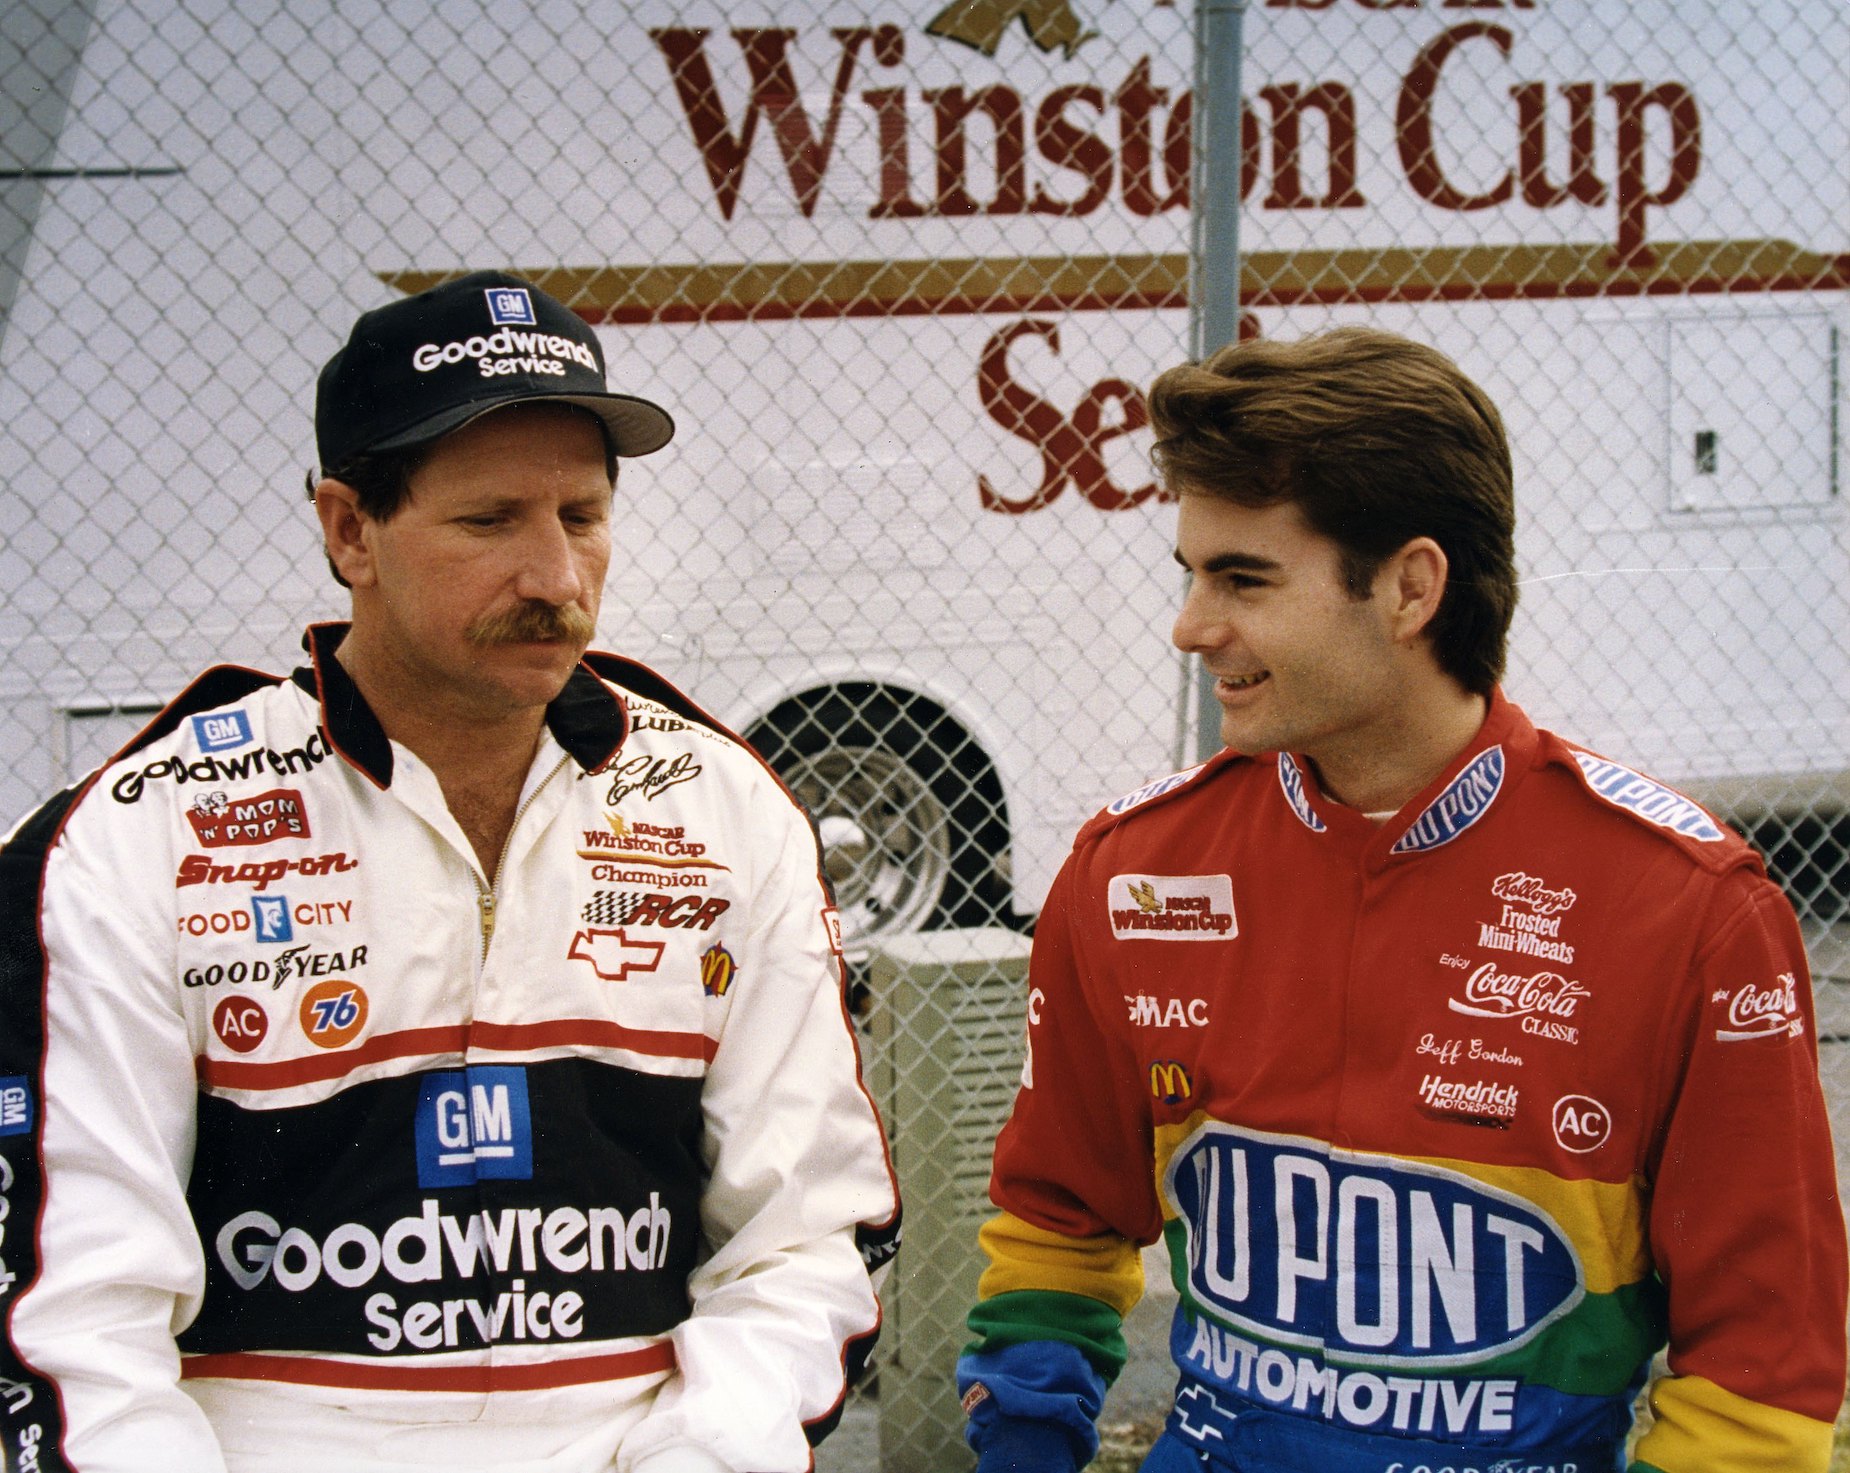 Dale Earnhardt (L) and Jeff Gordon (R) sit together at a race track during the 1990s.